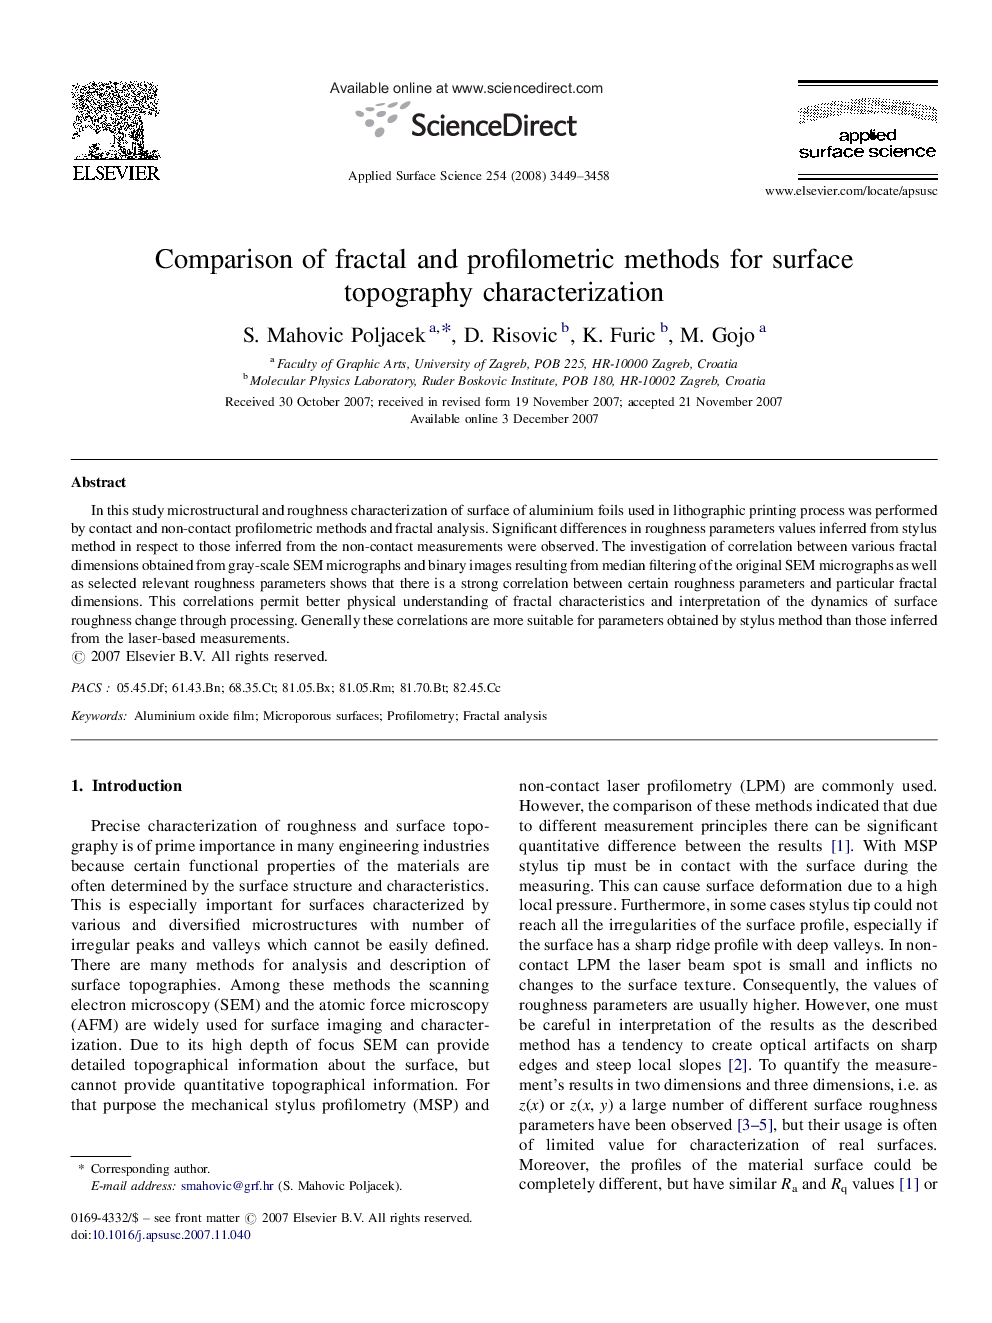 Comparison of fractal and profilometric methods for surface topography characterization